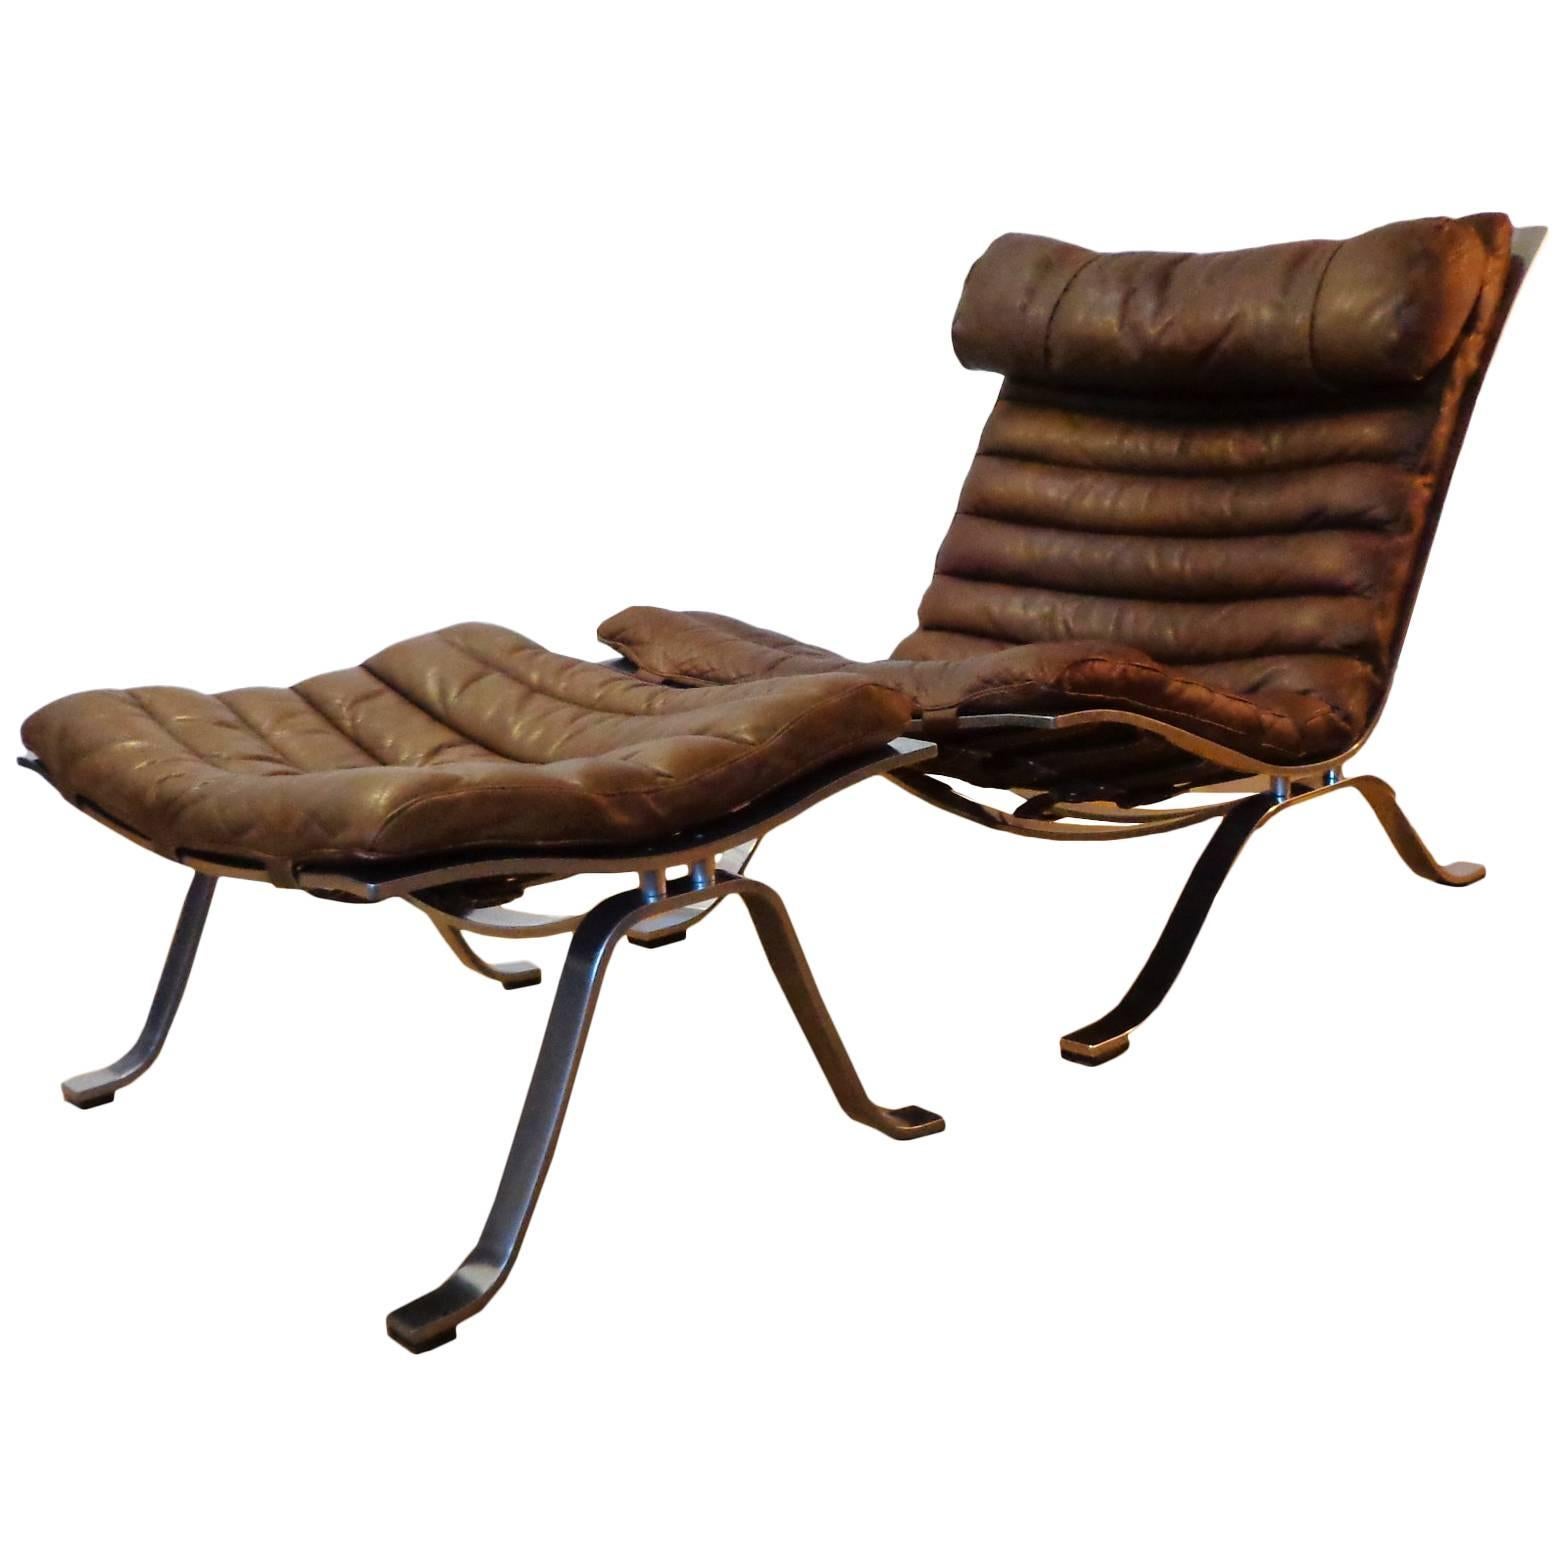 Arne Norell ‘Ari’ Lounge Chair and Ottoman in Original Cognac/Brown Leather